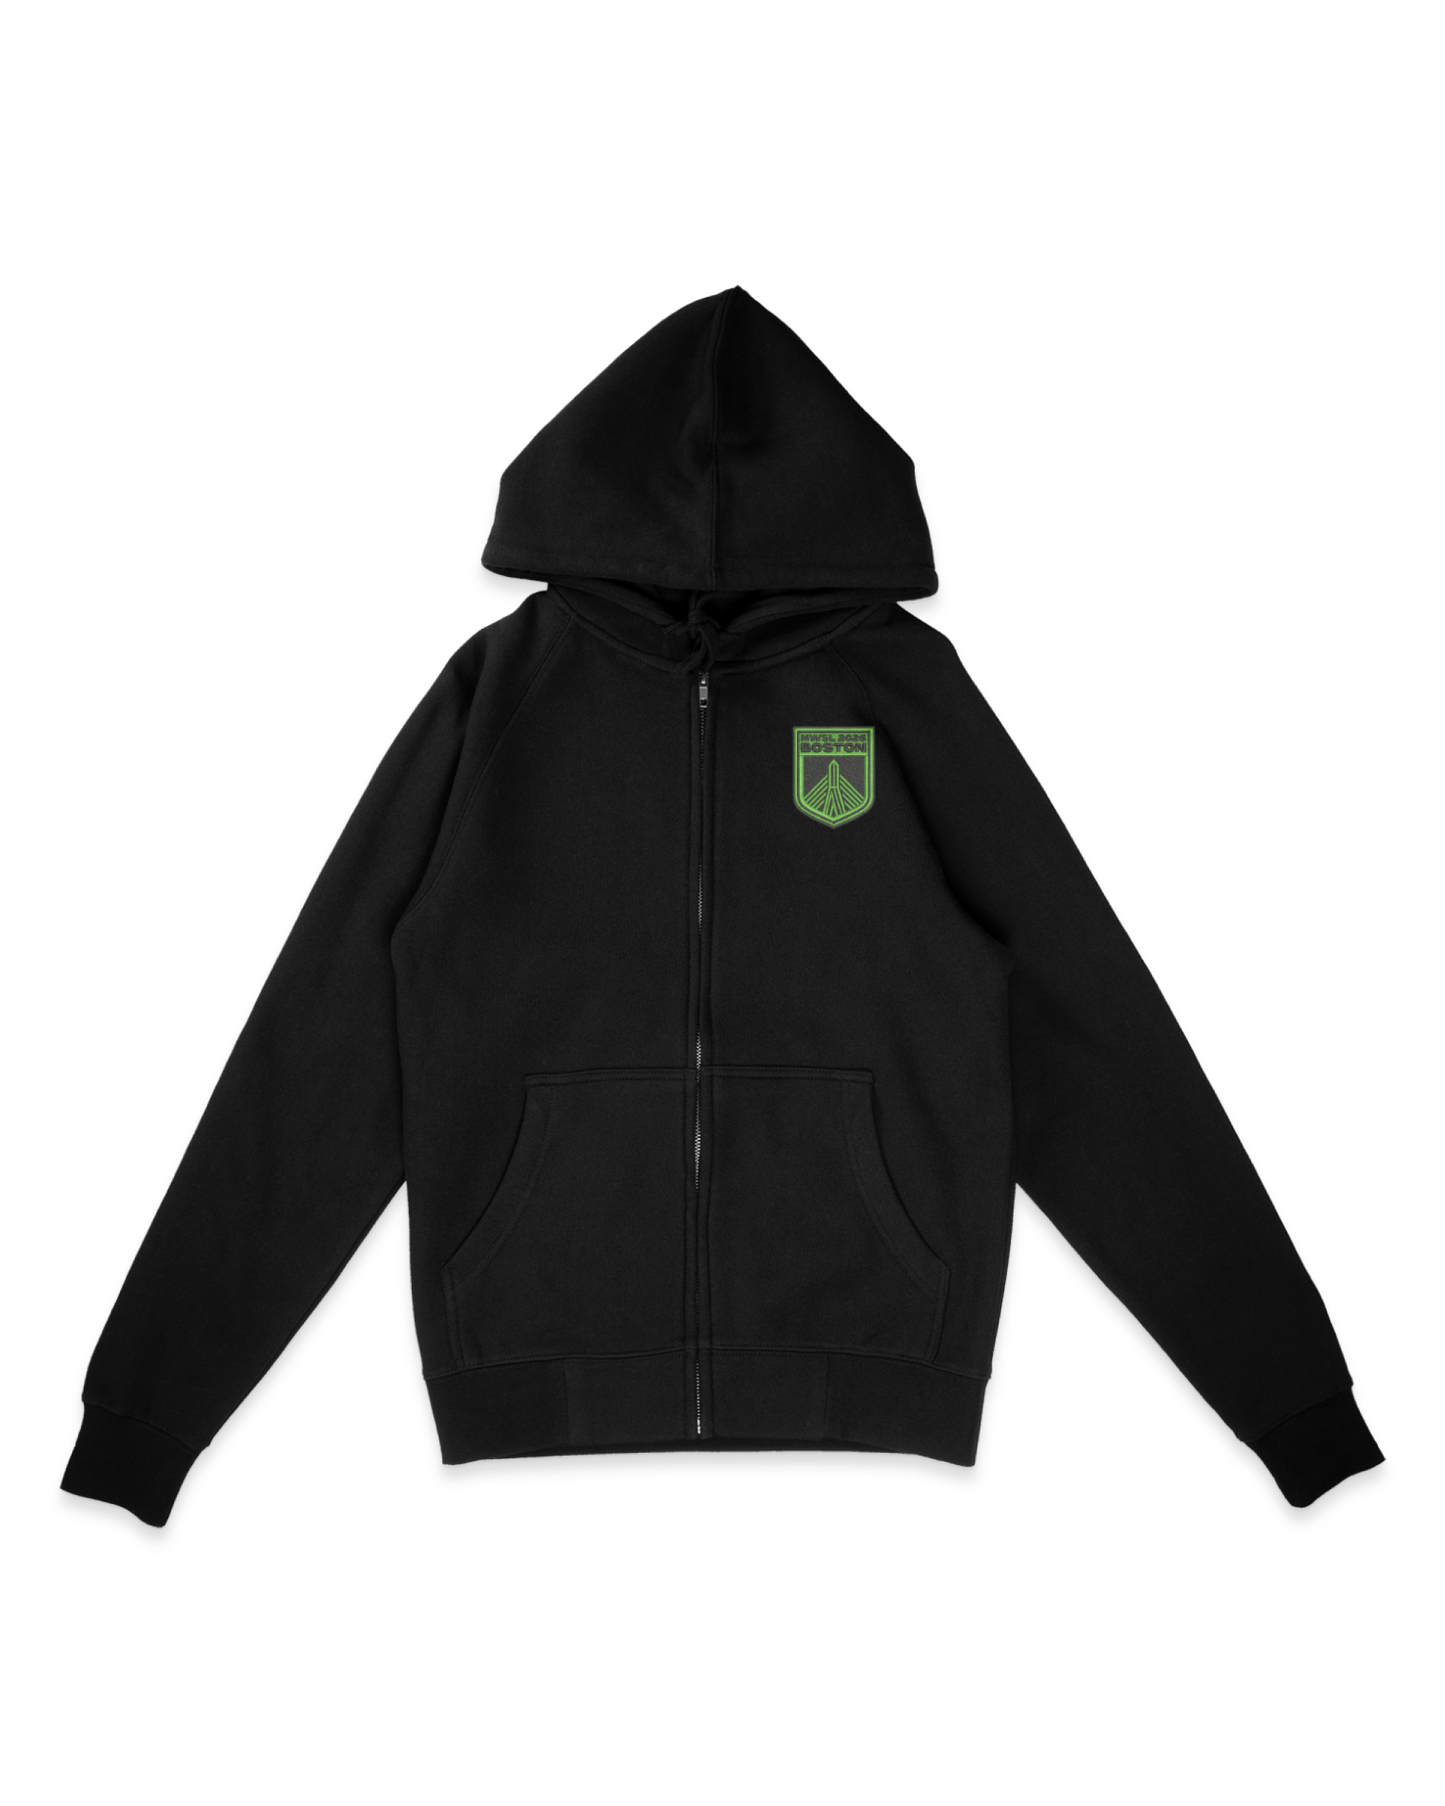 Made to Embroider Unisex Lightweight Full Zip